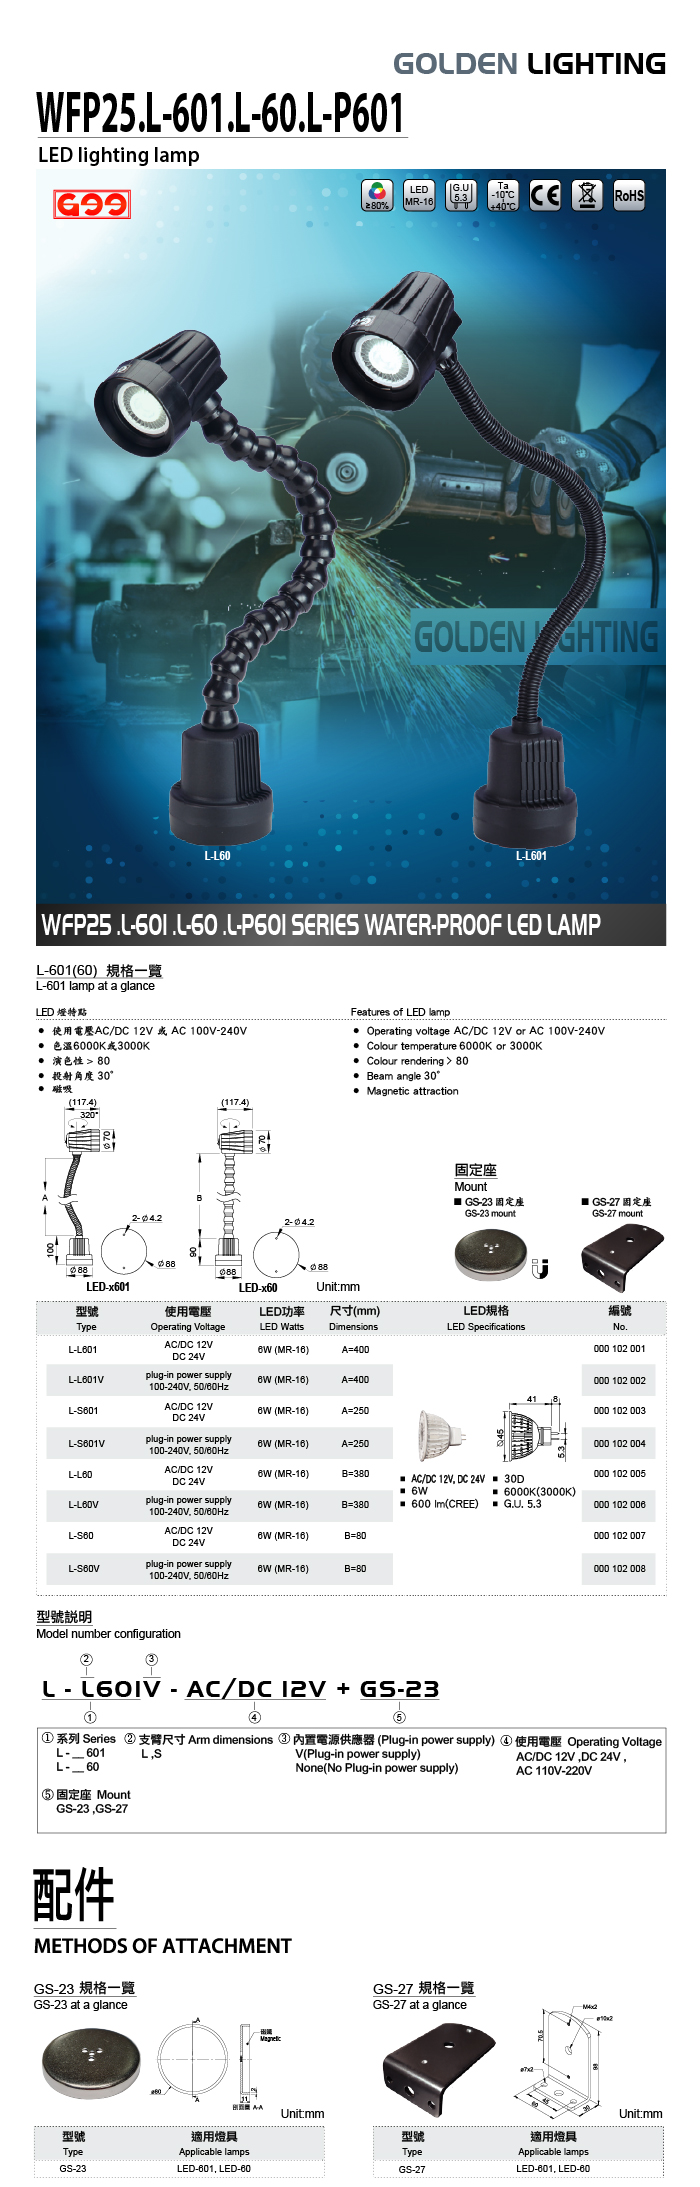 LED-601.60 concentrated LED lighting lamp-flexible